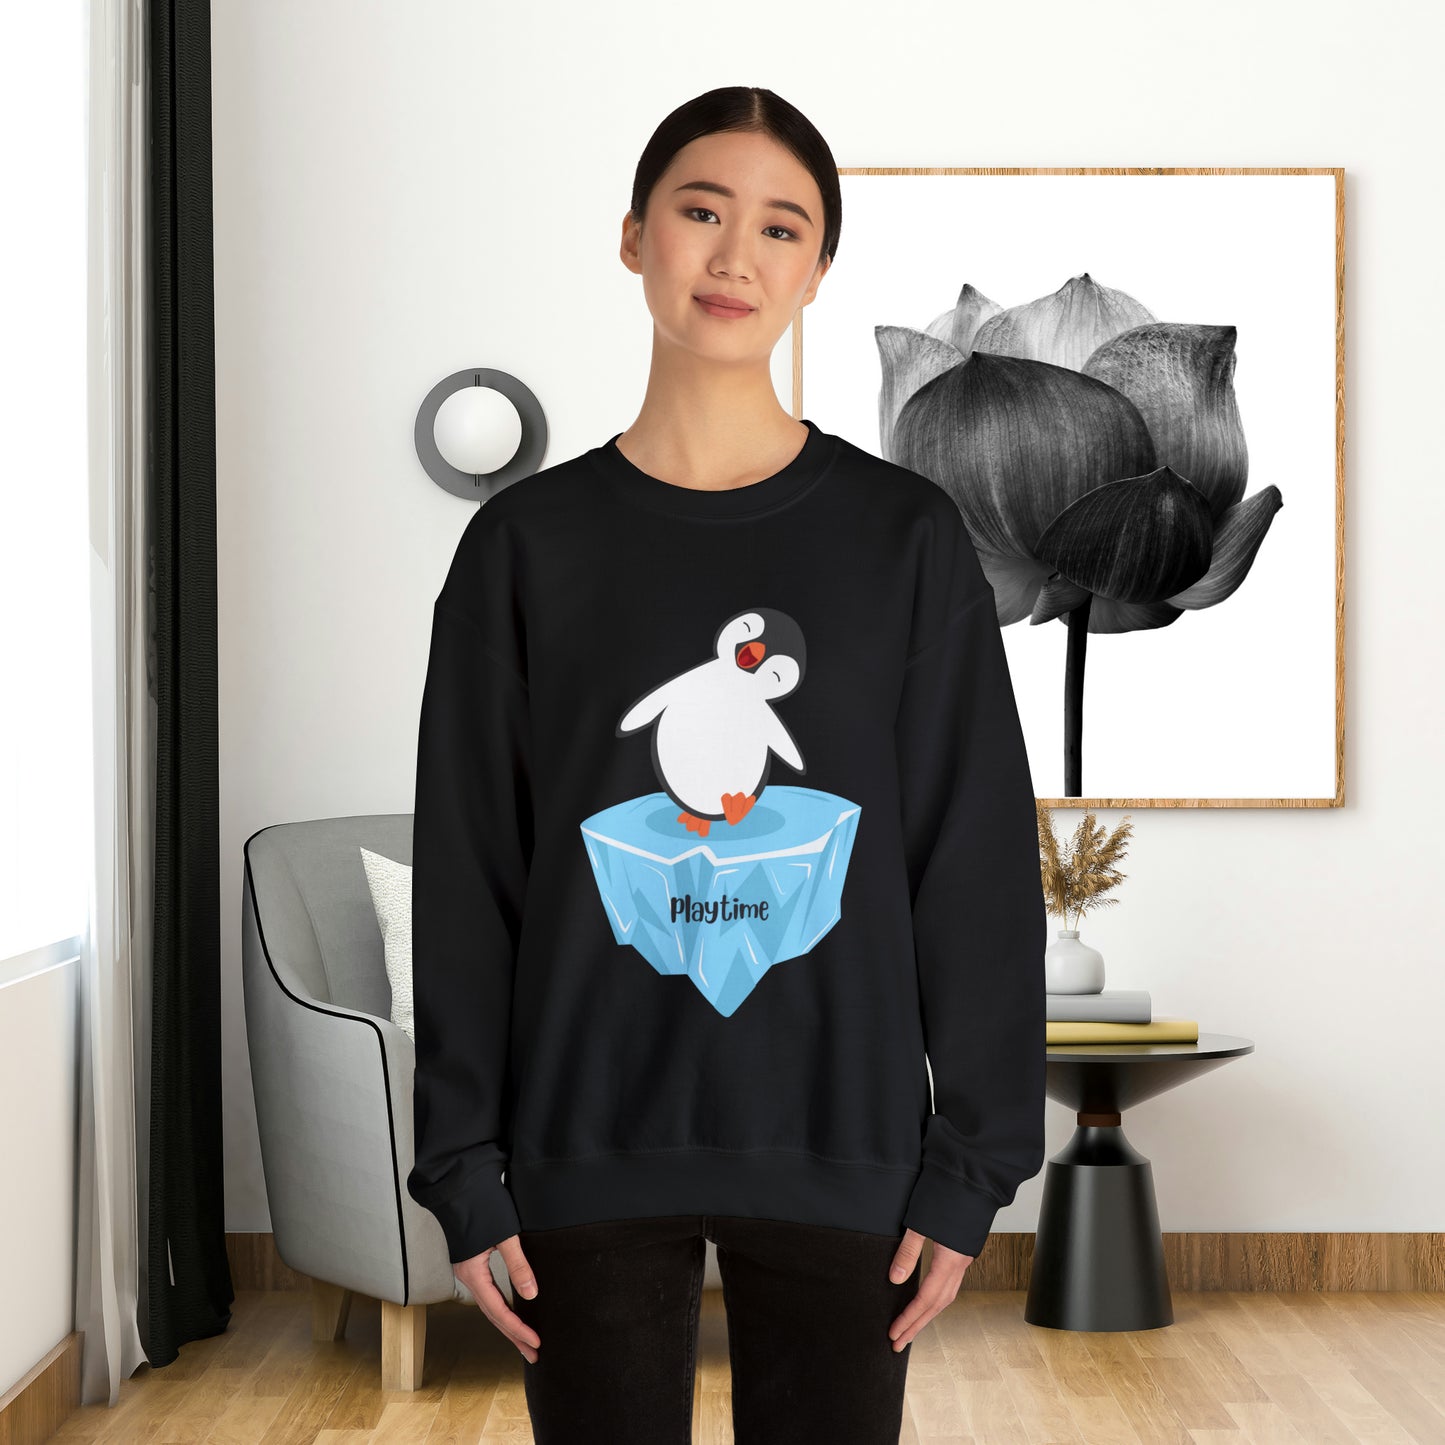 Playtime! Cute and happy penguin on an iceberg design. Give the gift of this Unisex Heavy Blend™ Crewneck Sweatshirt or get one for yourself.